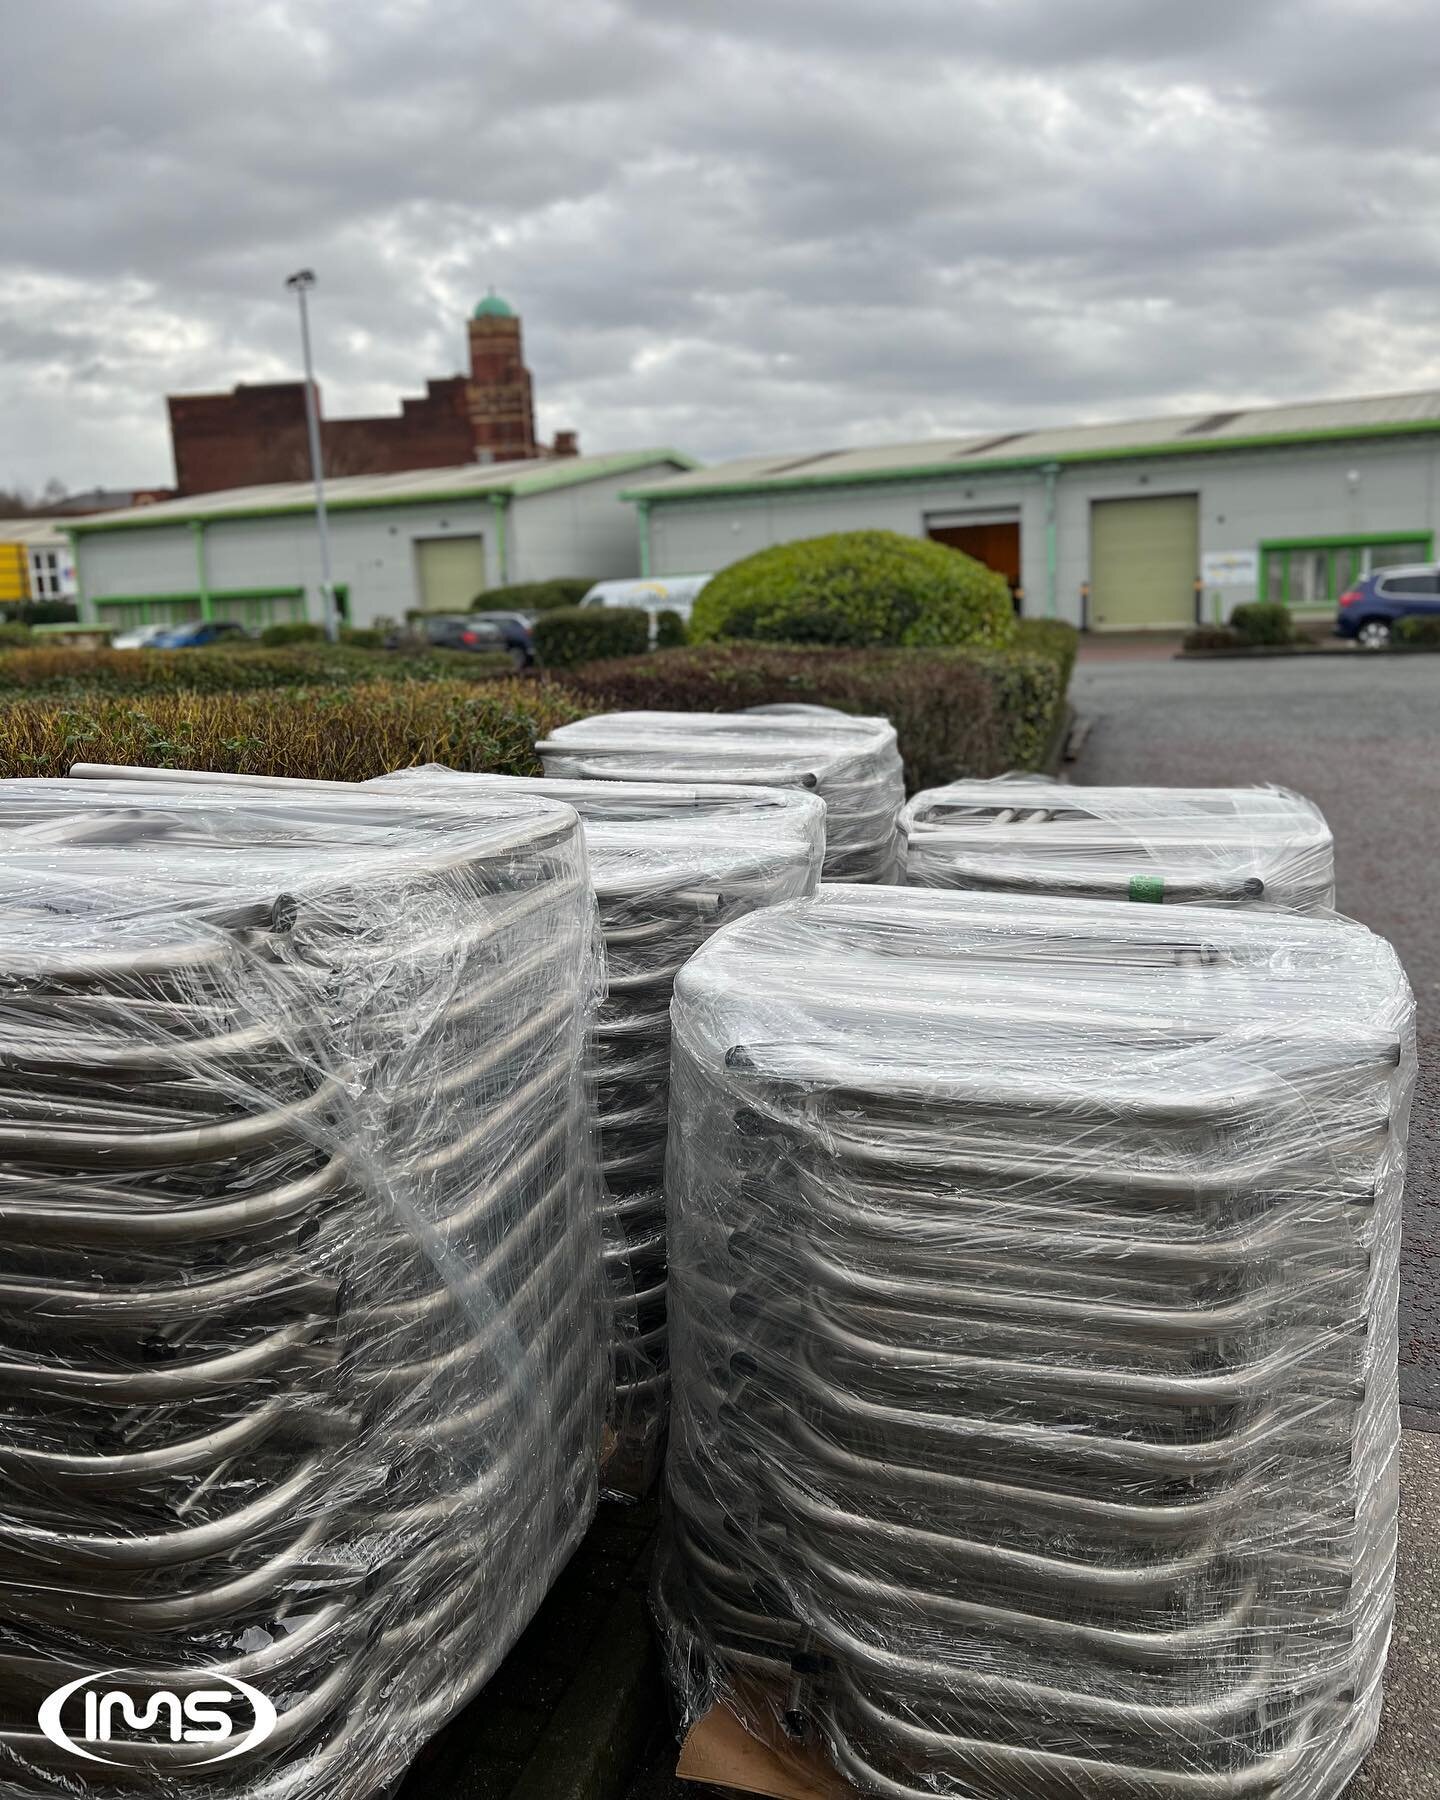 It might be a gloomy day here, but these neatly packed cycle stands are doing a good job at brightening it! Ready to go to one of our trade customers 🌞☁️ 

#cyclestands #stainlesssteel #packed #delivery